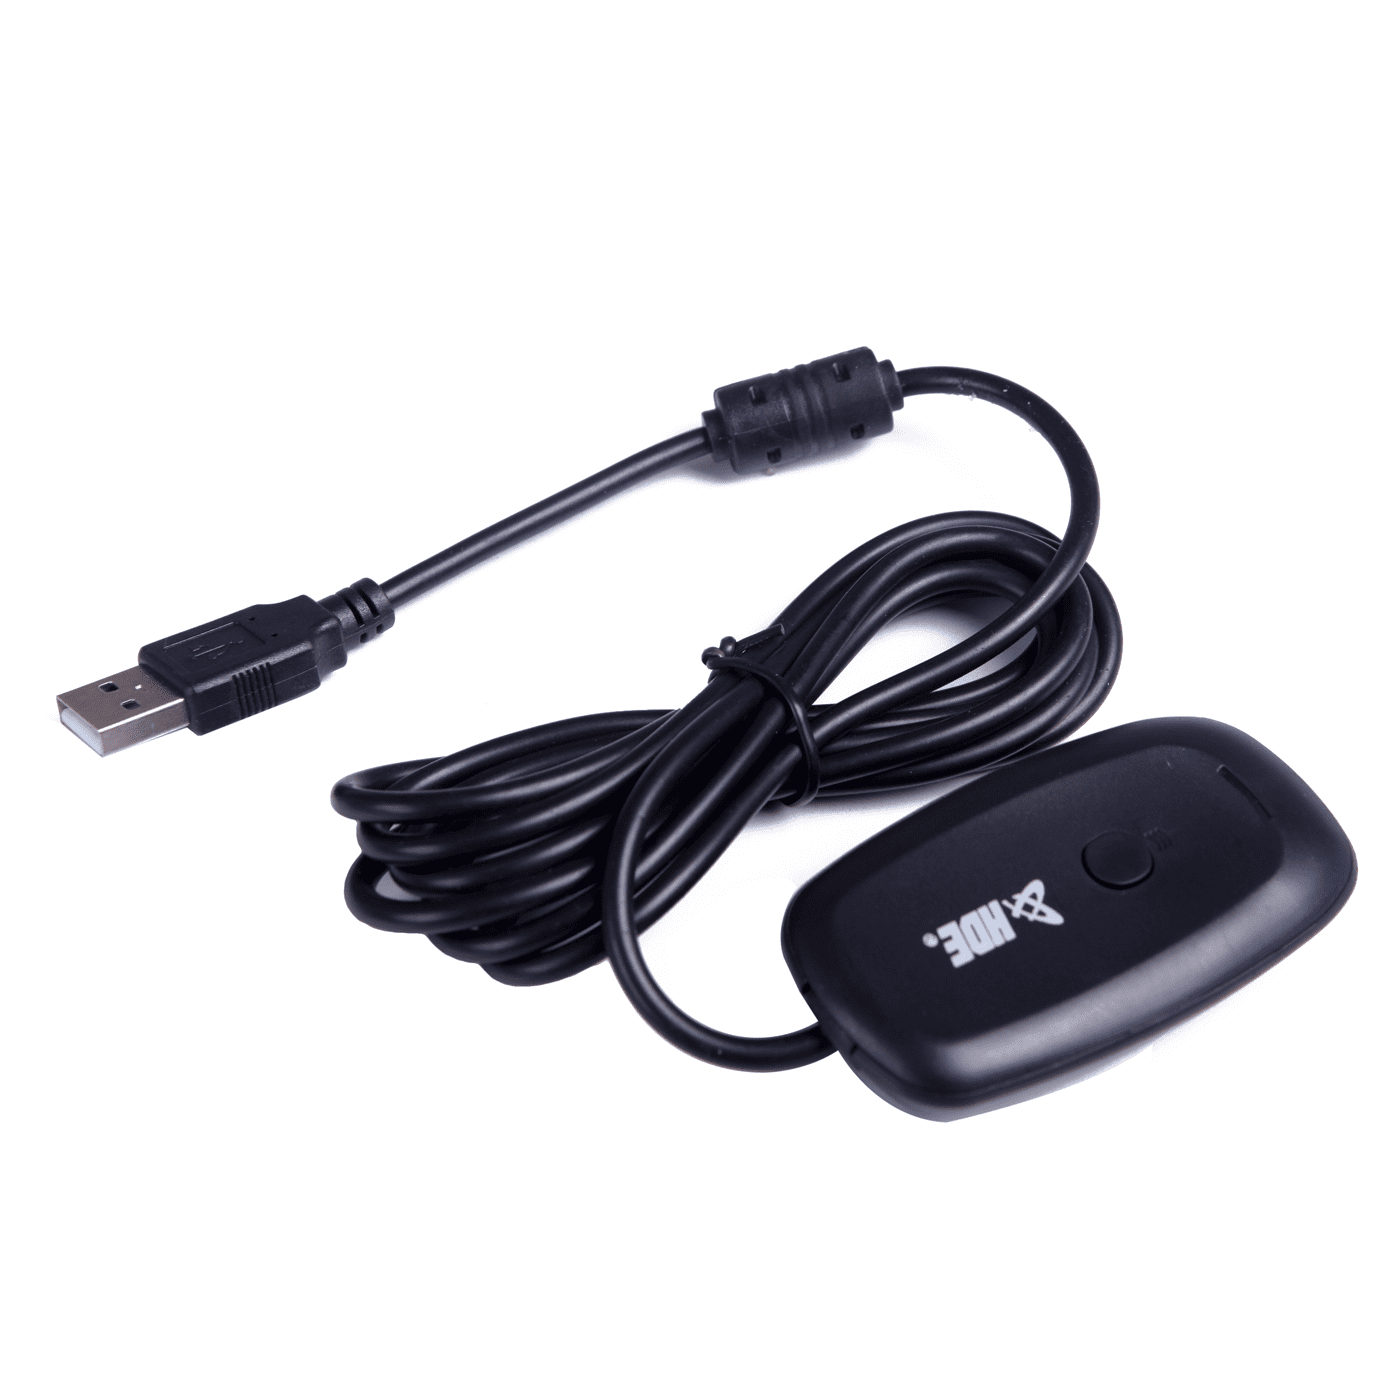 hde wireless receiver for xbox 360 driver download